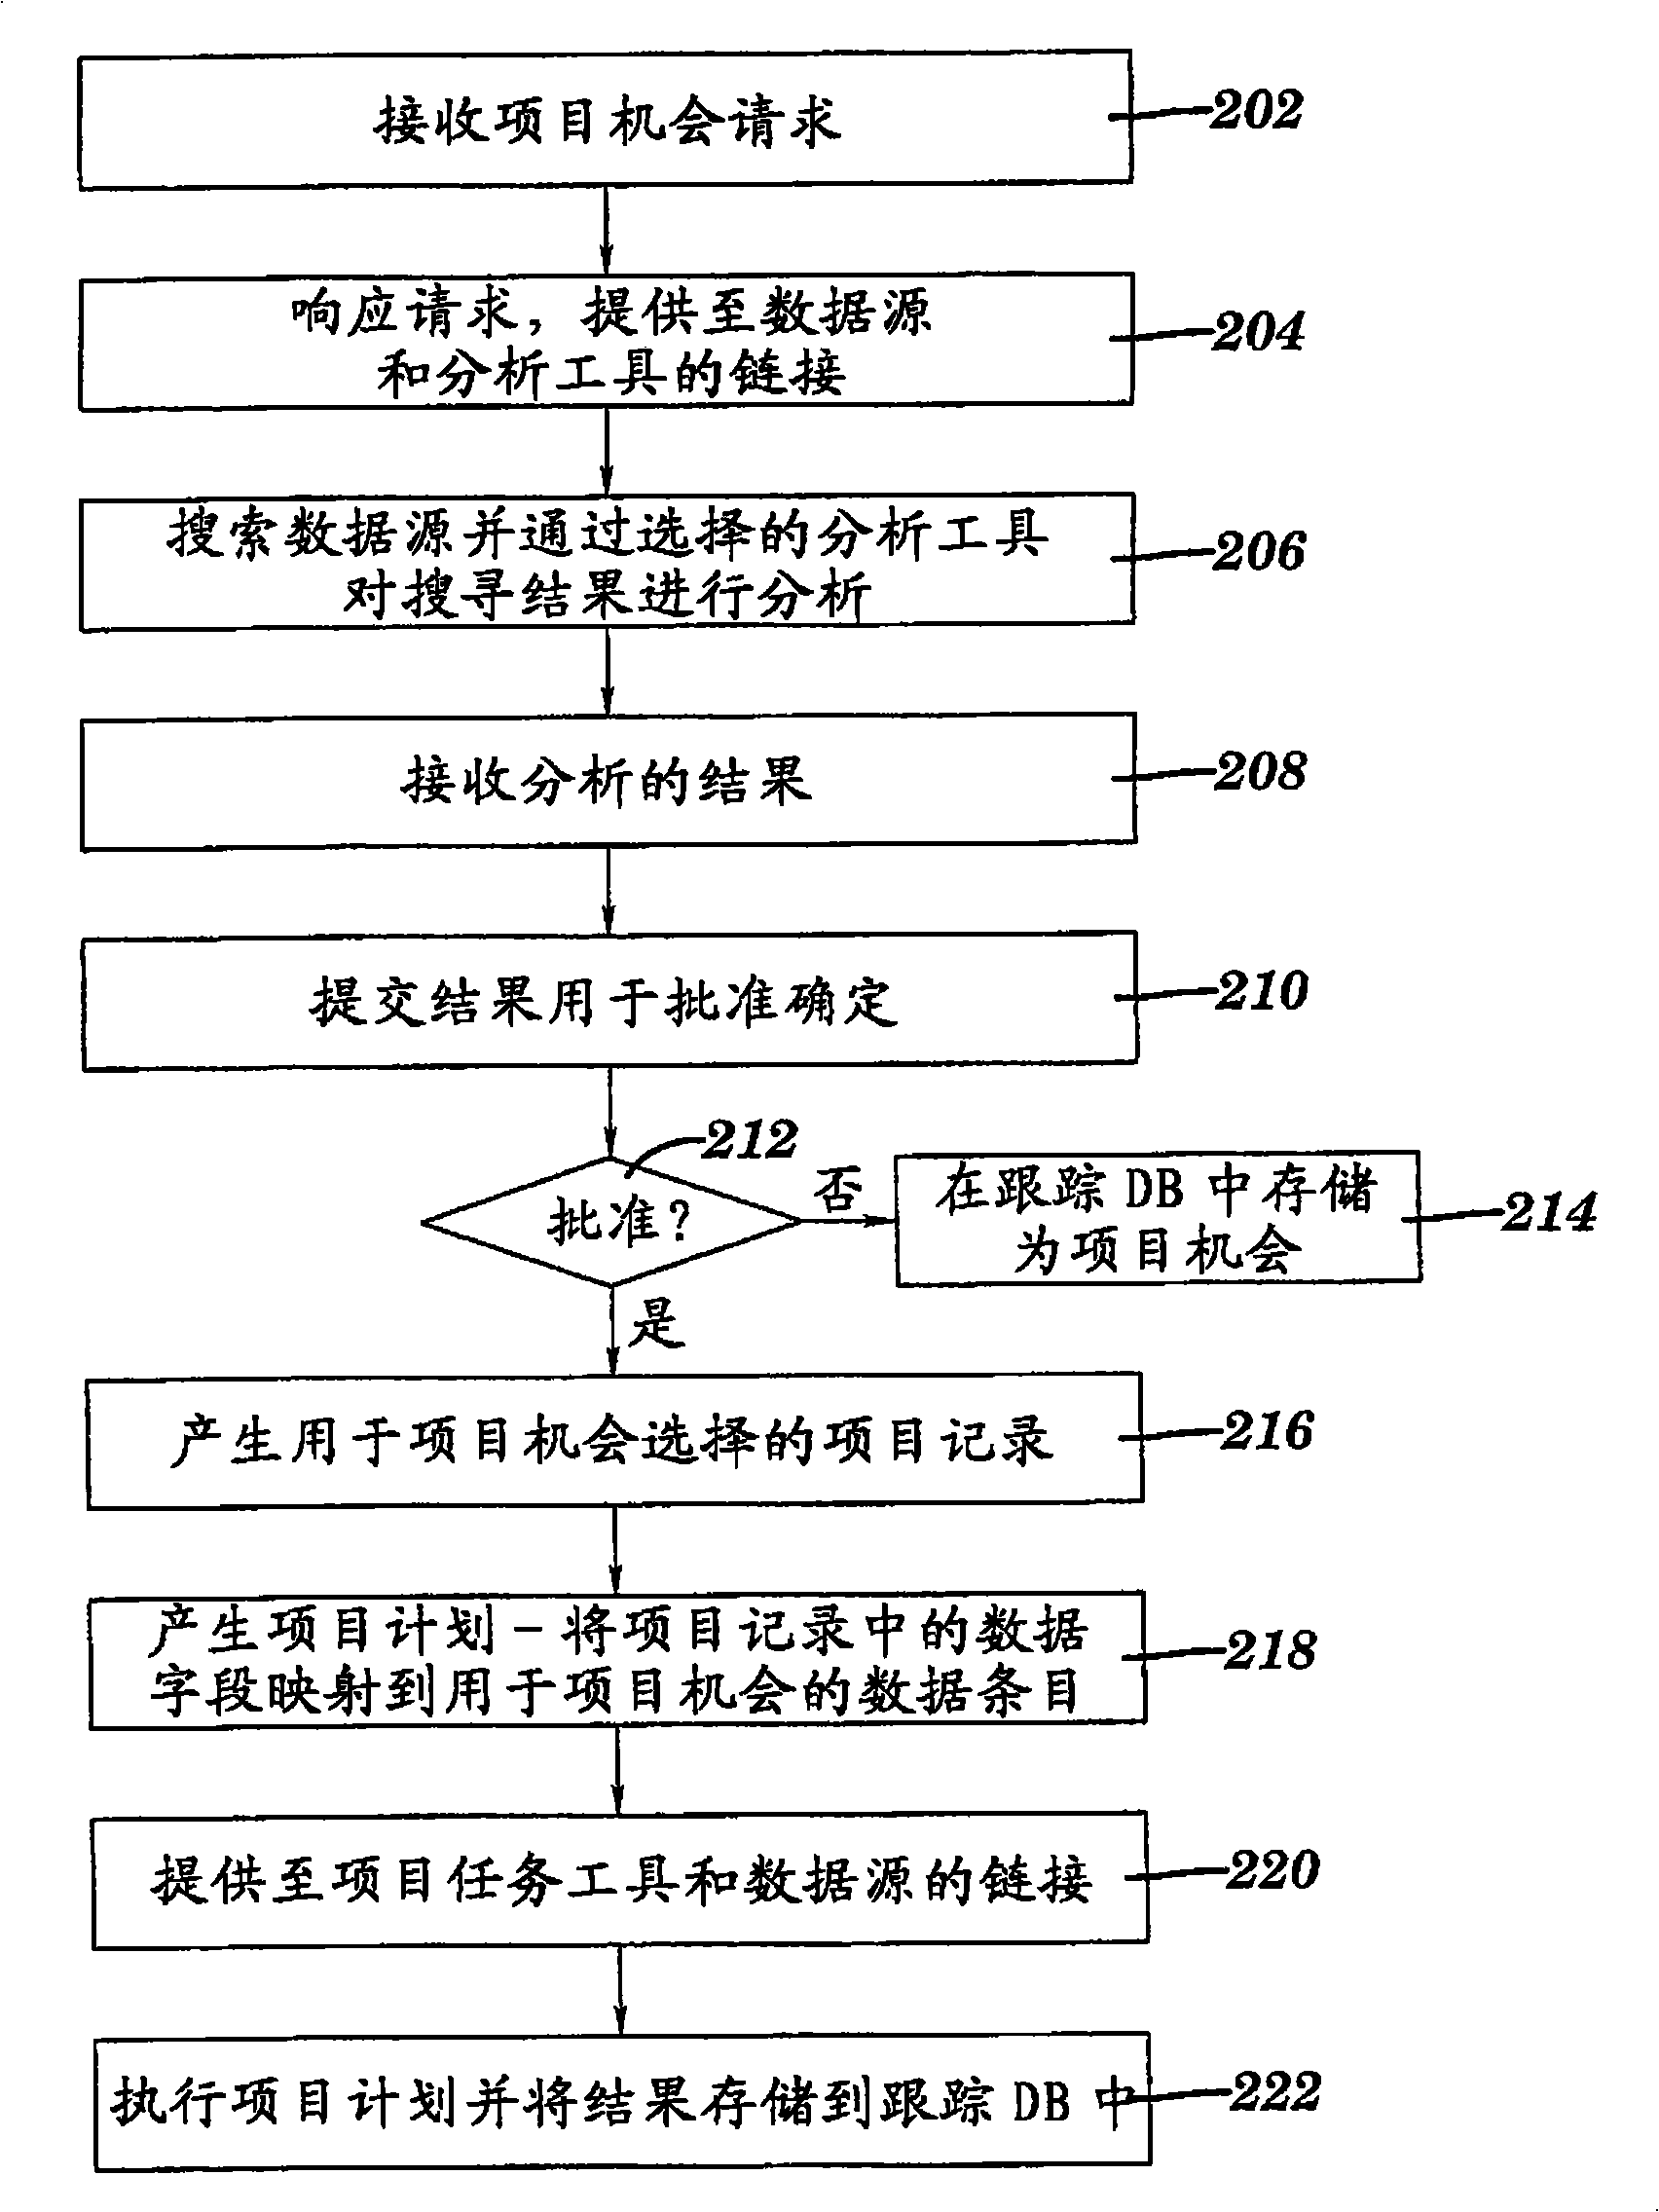 Methods and systems for implementing an end-to-end project management system